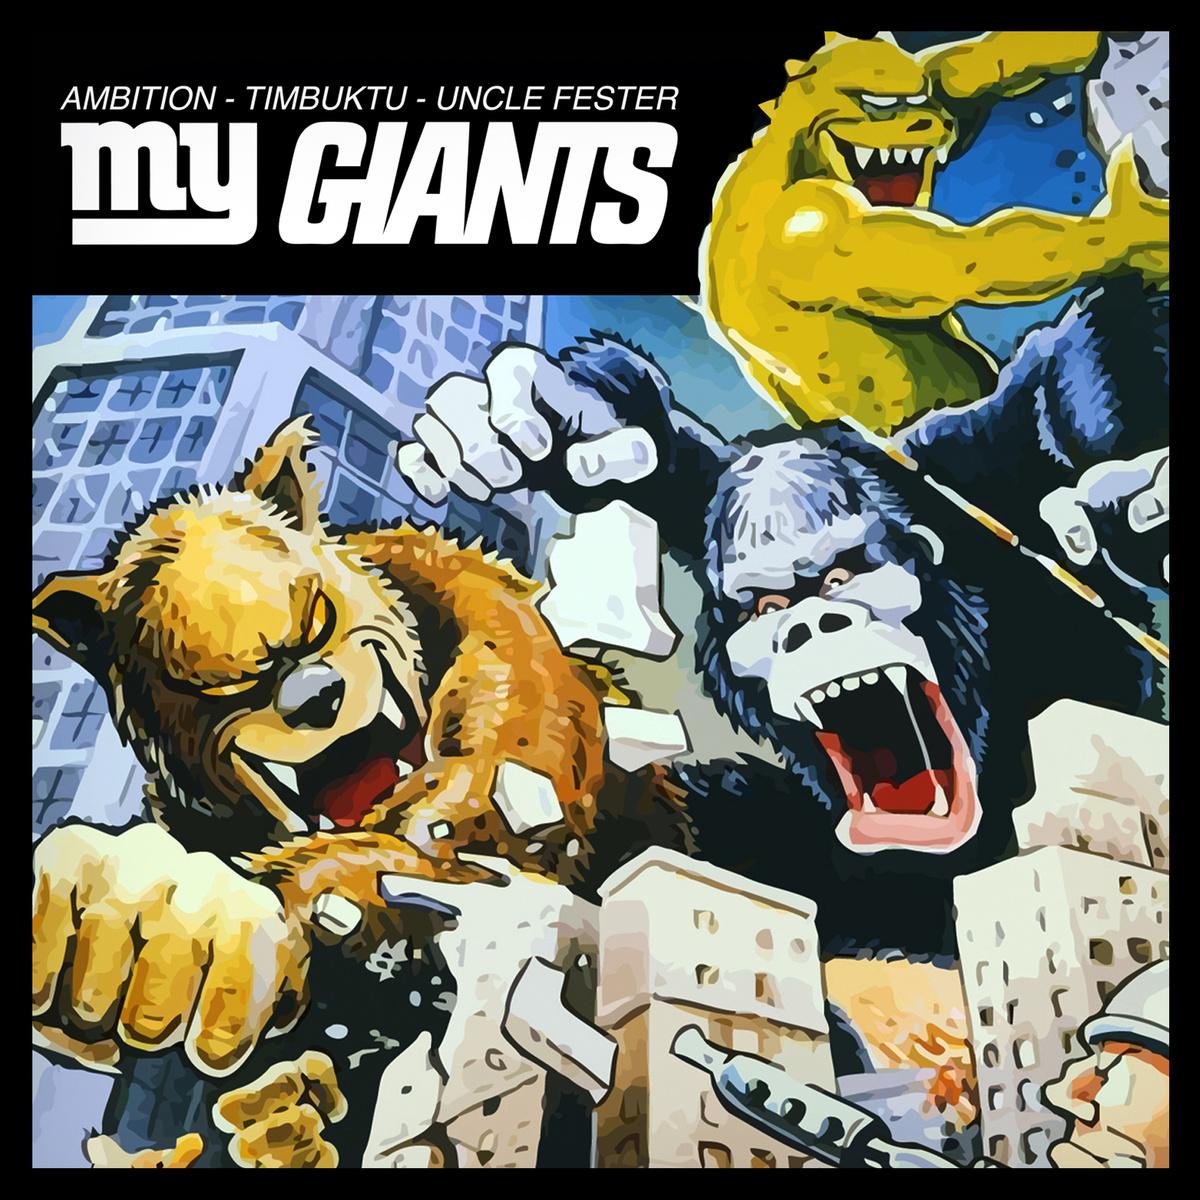 Ambition, Timbuktu & Uncle Fester - "My Giants" (Release)